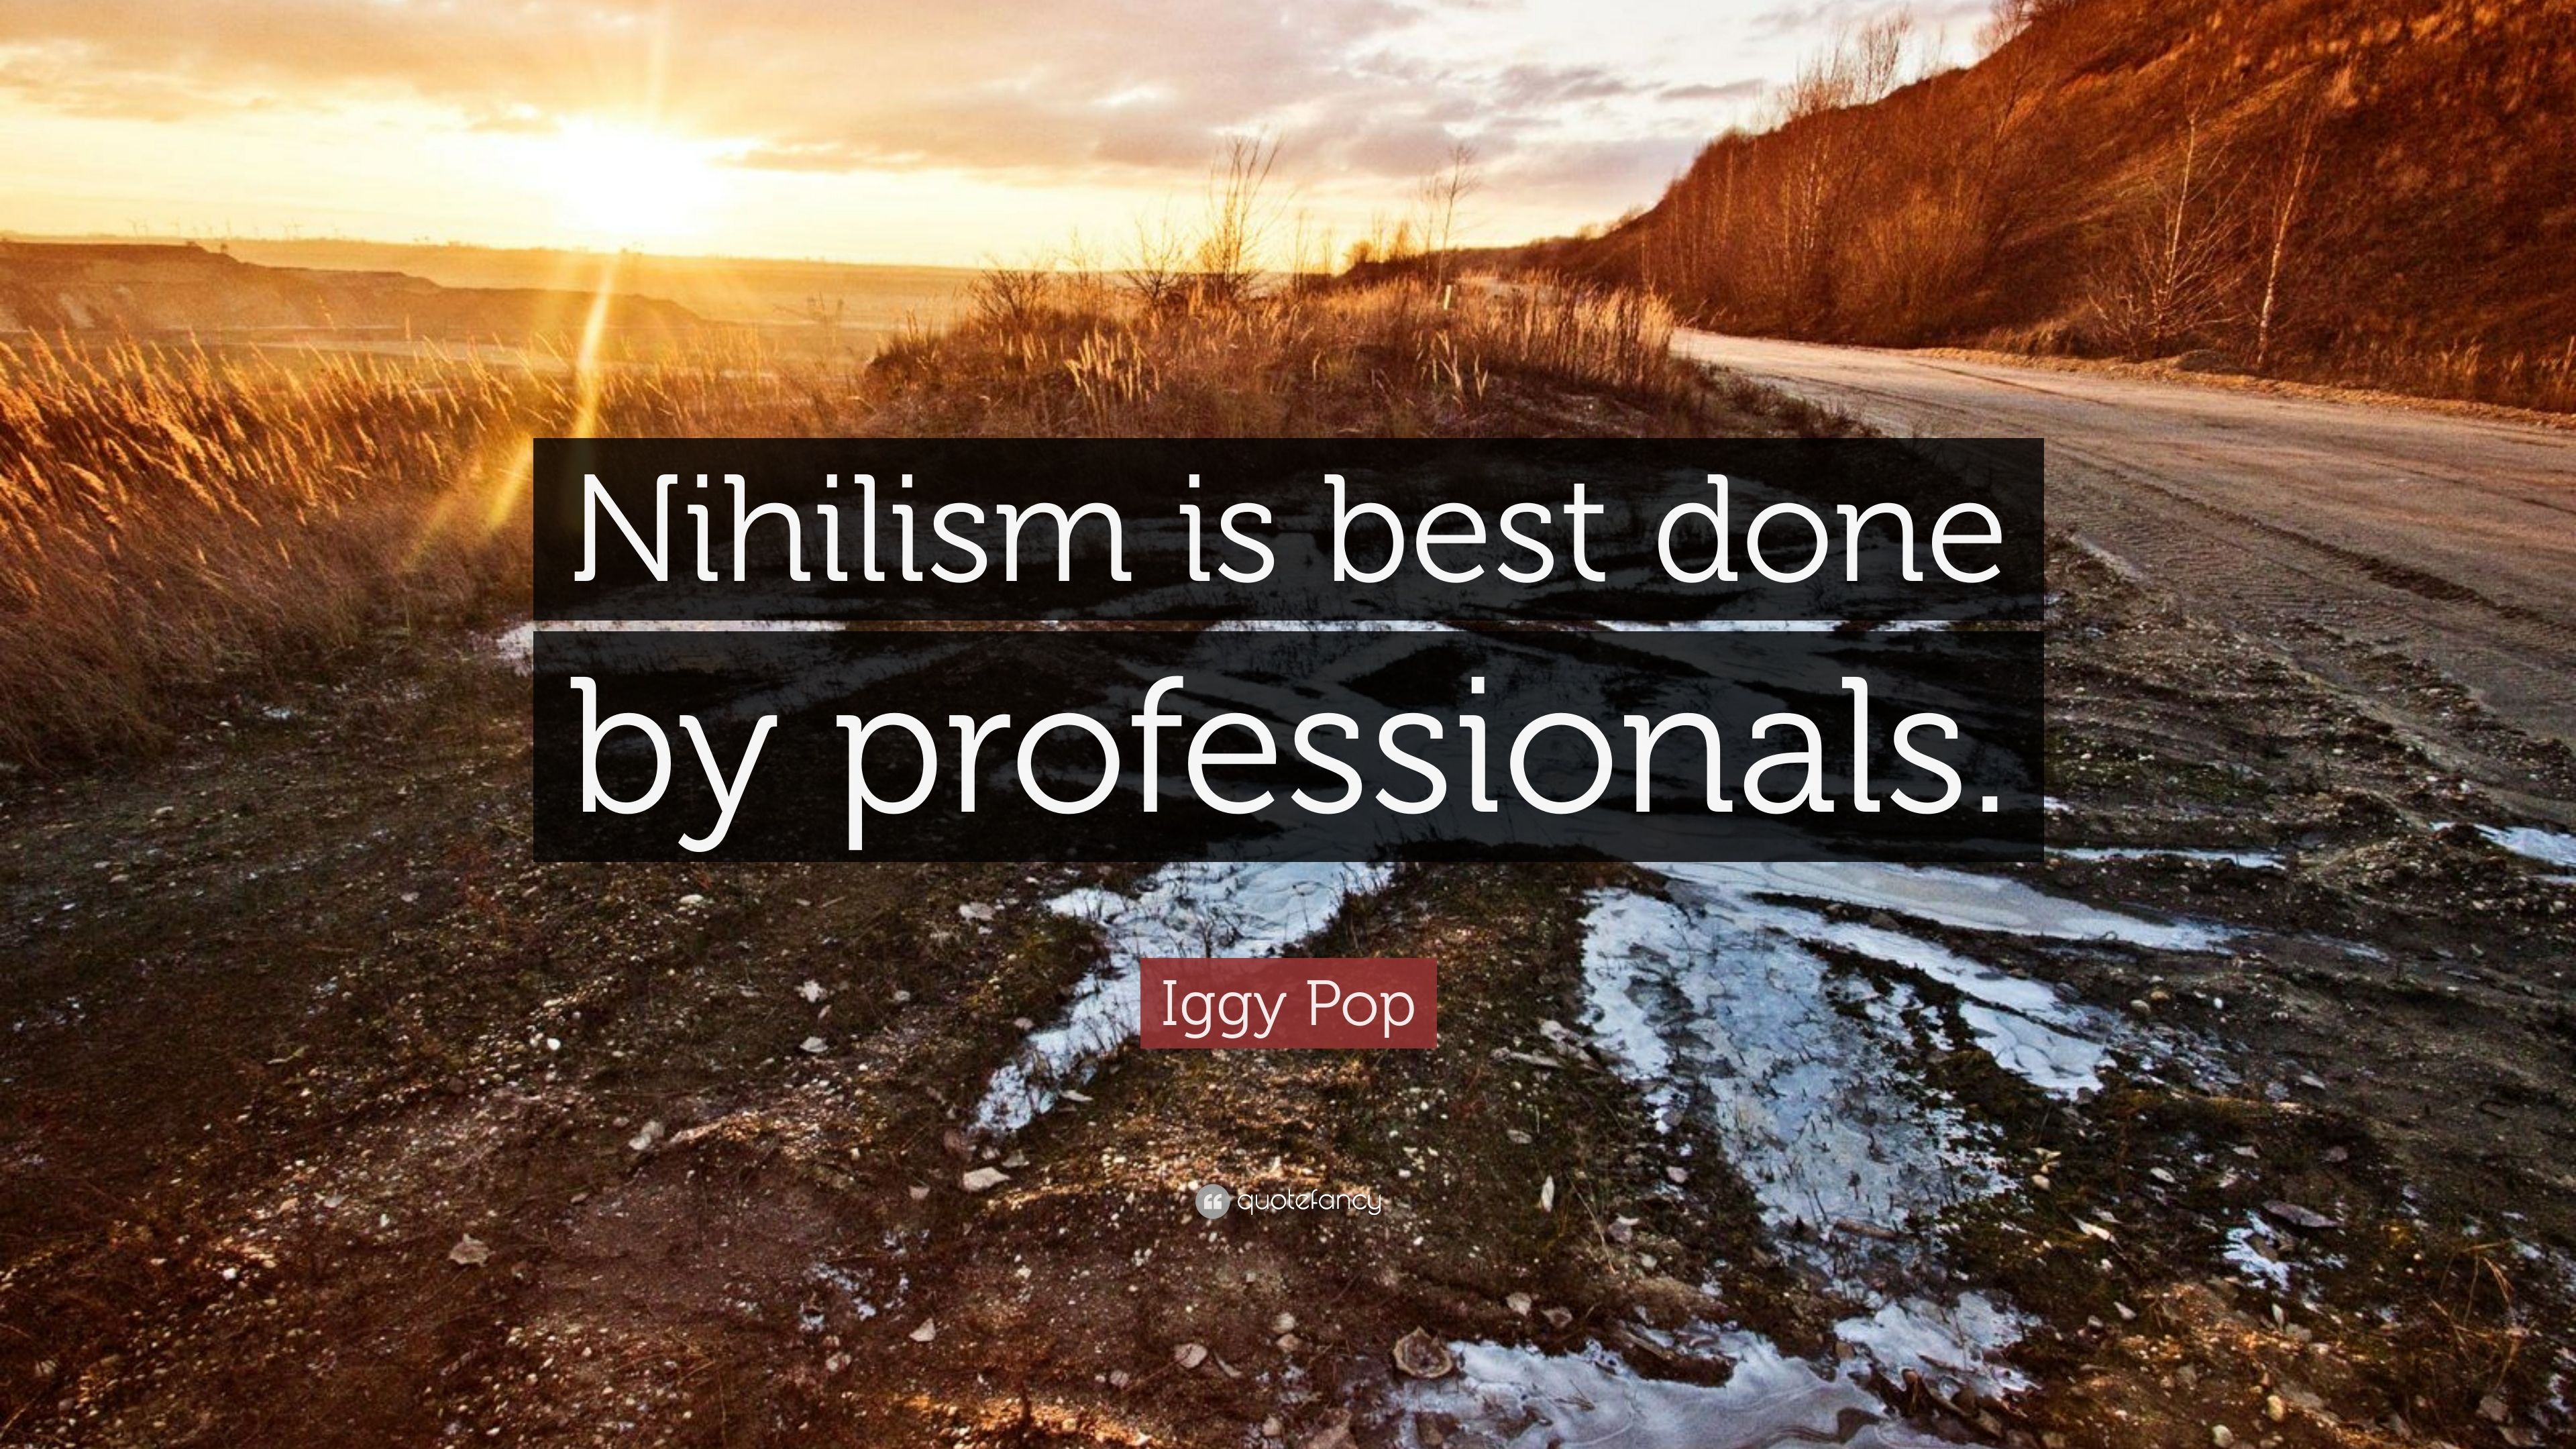 Iggy Pop Quote: “Nihilism is best done by professionals.” (12 wallpaper)